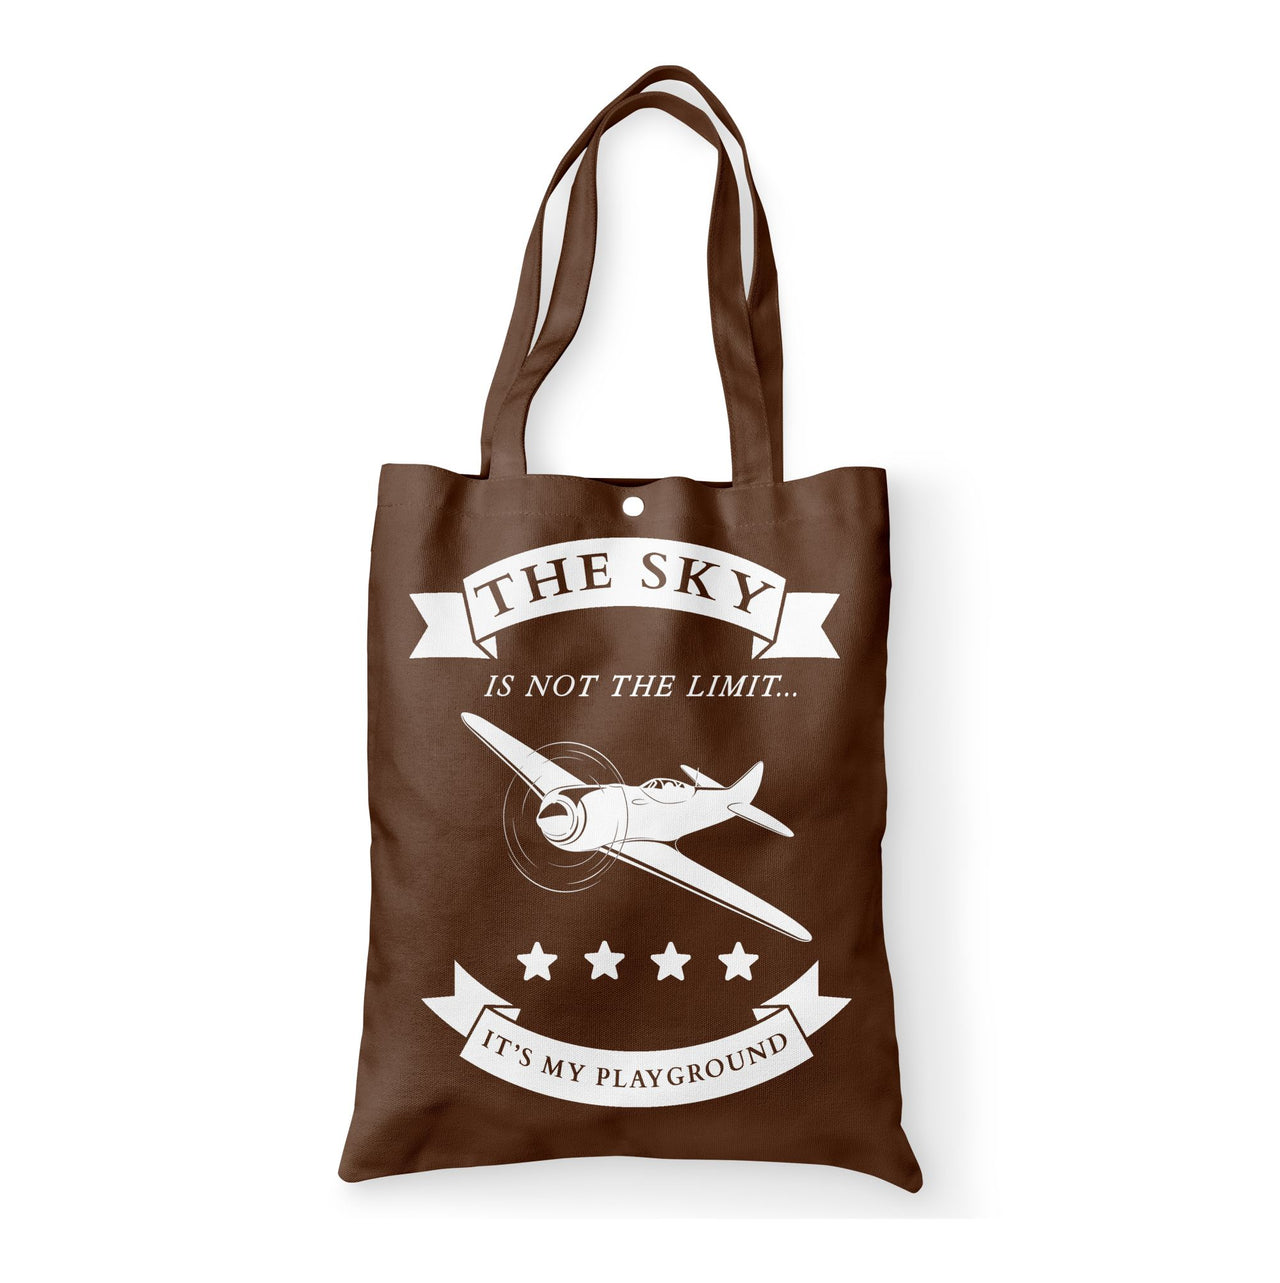 The Sky is not the limit, It's my playground Designed Tote Bags